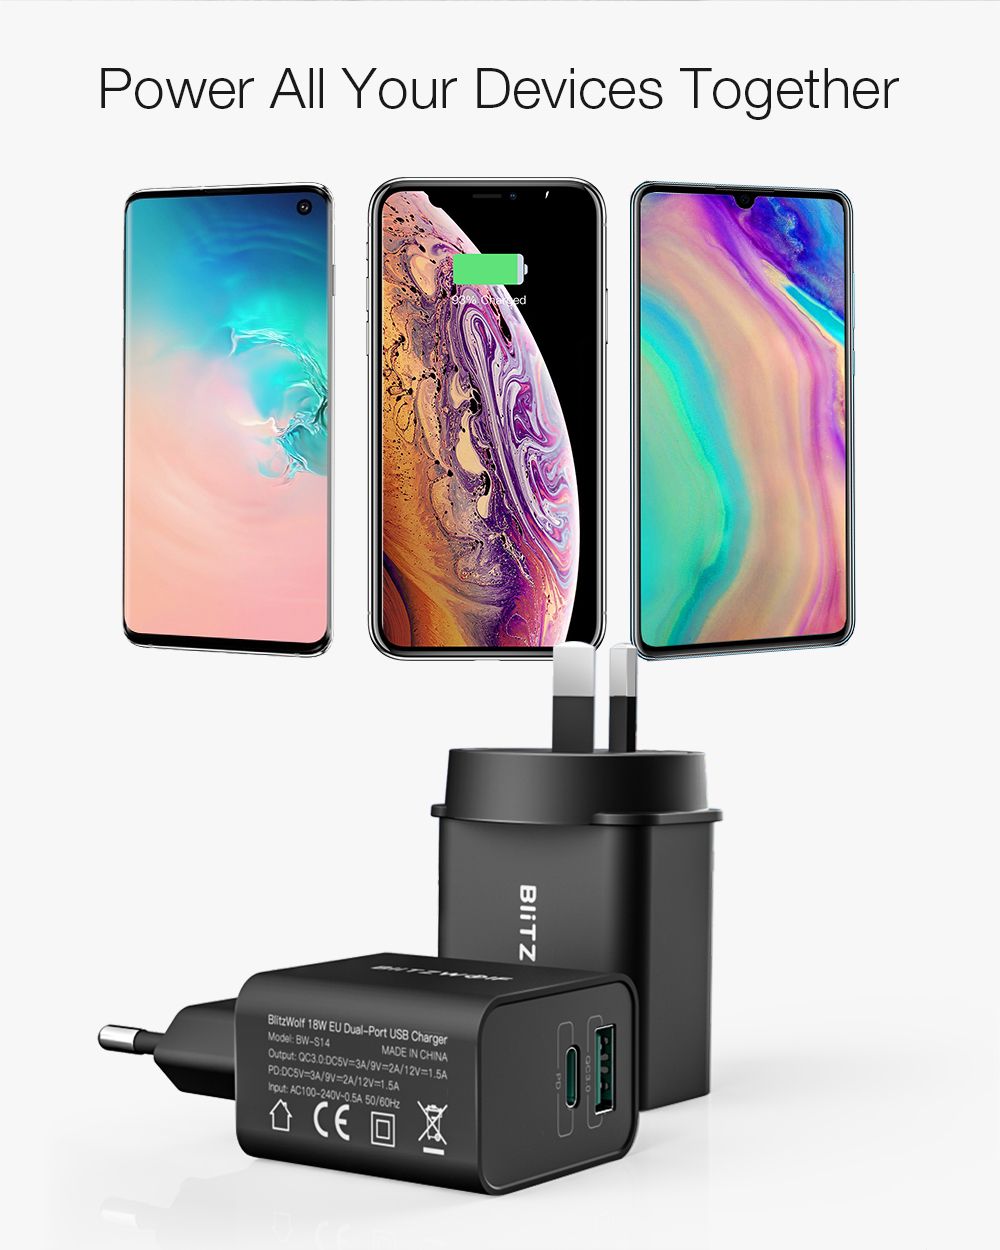 BlitzWolfreg-BW-S14-18W-Type-C-PD30-QC30-Wall-USB-Charger-EU-AU-for-iPhone-11-Pro-XR-Huawei-P30-for--1607994